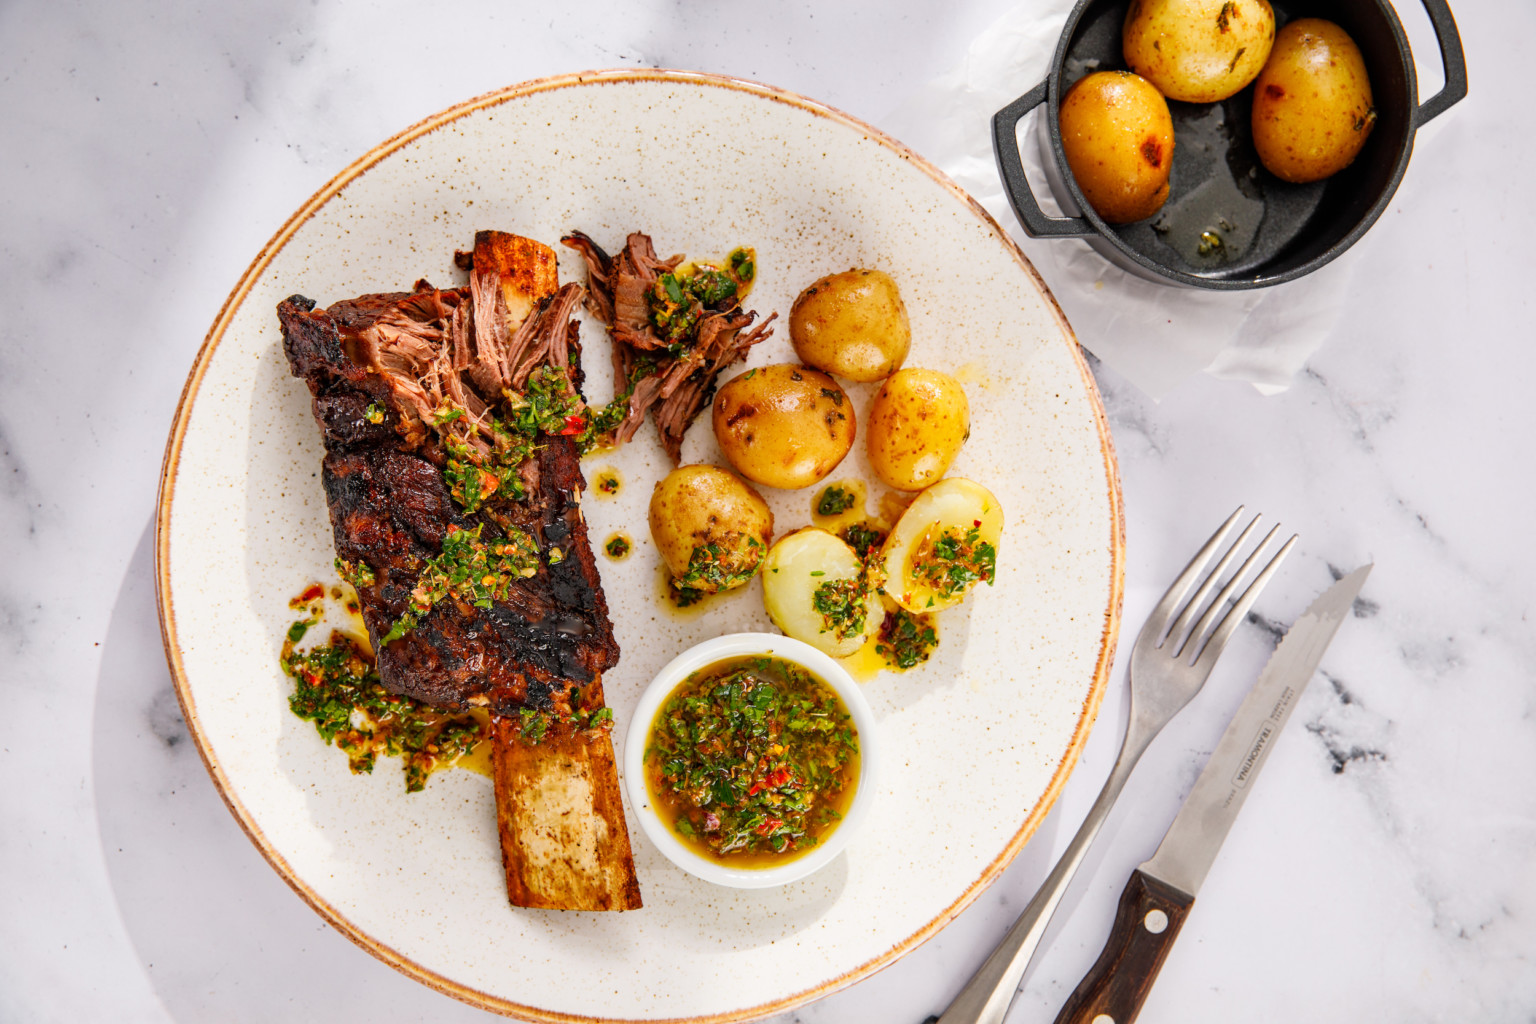 From Coast to City: Bar + Block’s Nationwide Steakhouse Delights